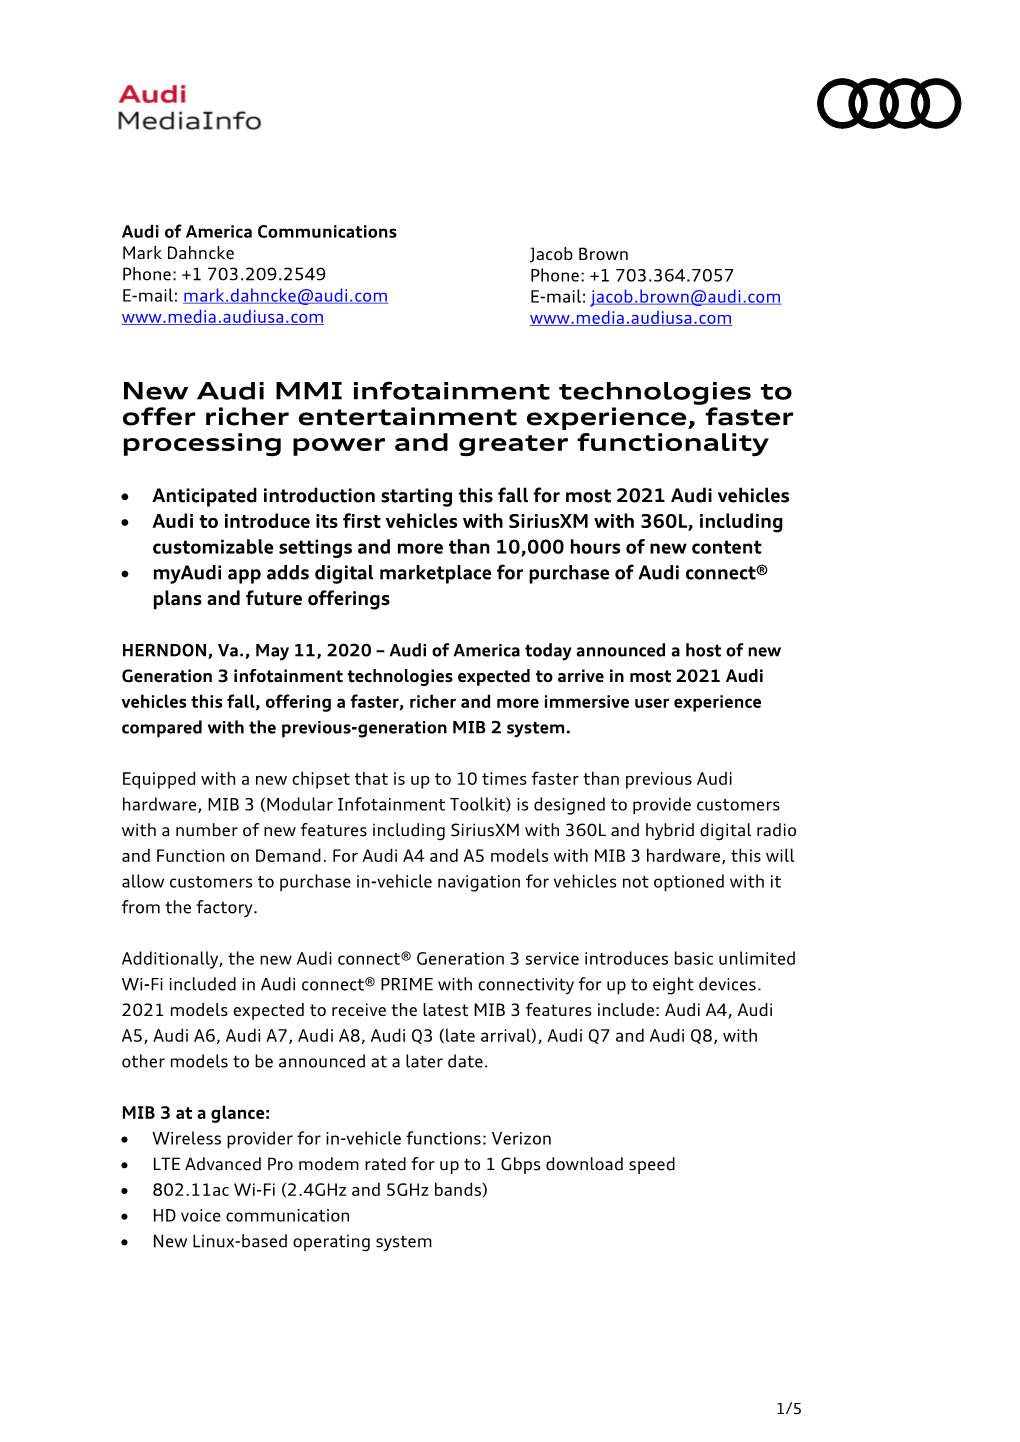 New Audi MMI Infotainment Technologies to Offer Richer Entertainment Experience, Faster Processing Power and Greater Functionality